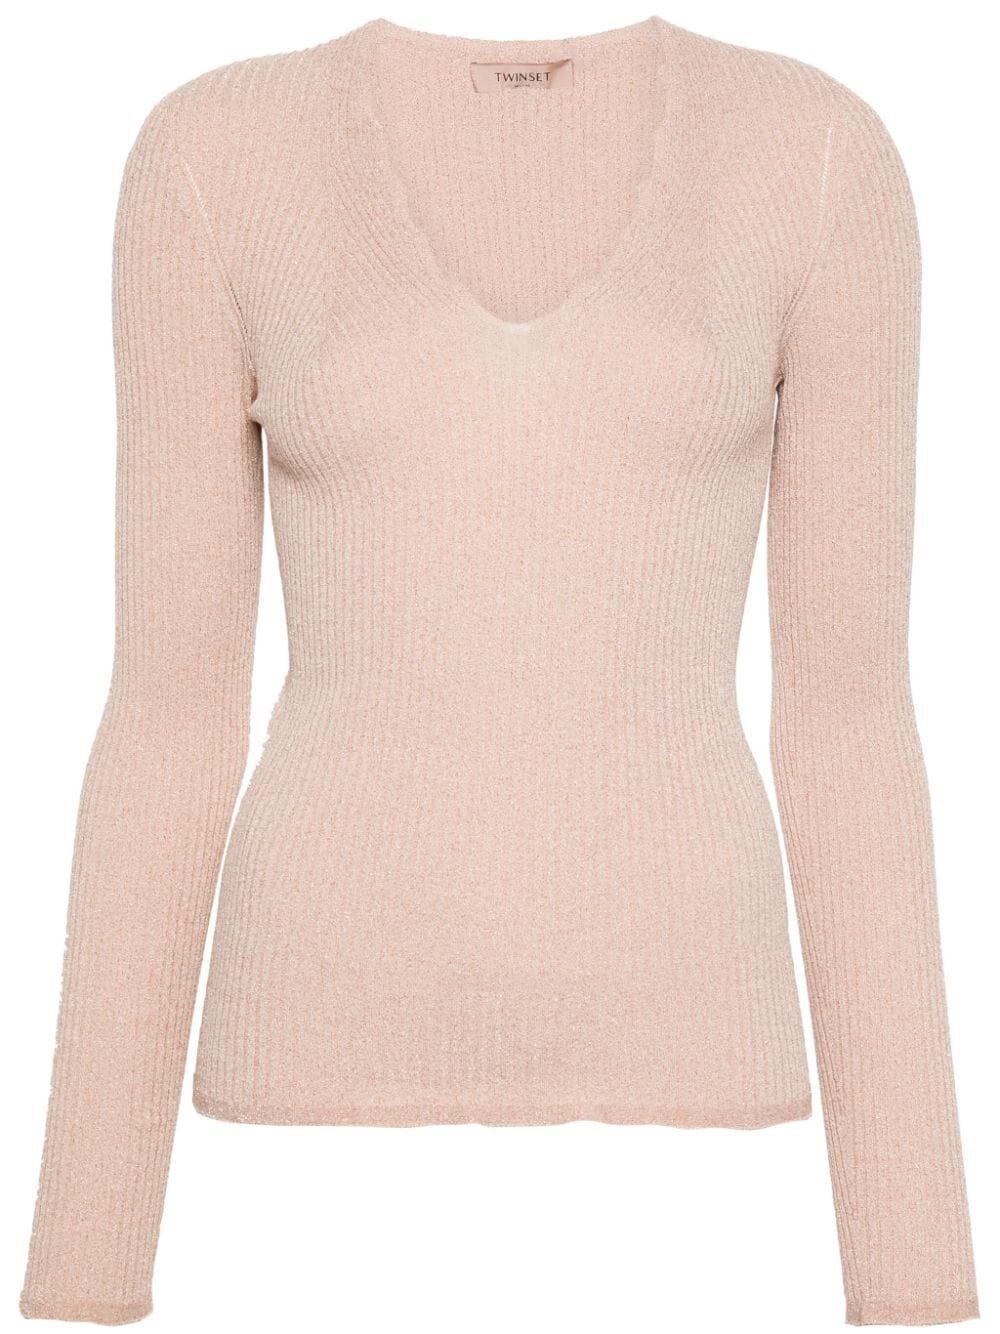 Twinset Ribbed Knit Sweater In Nude & Neutrals